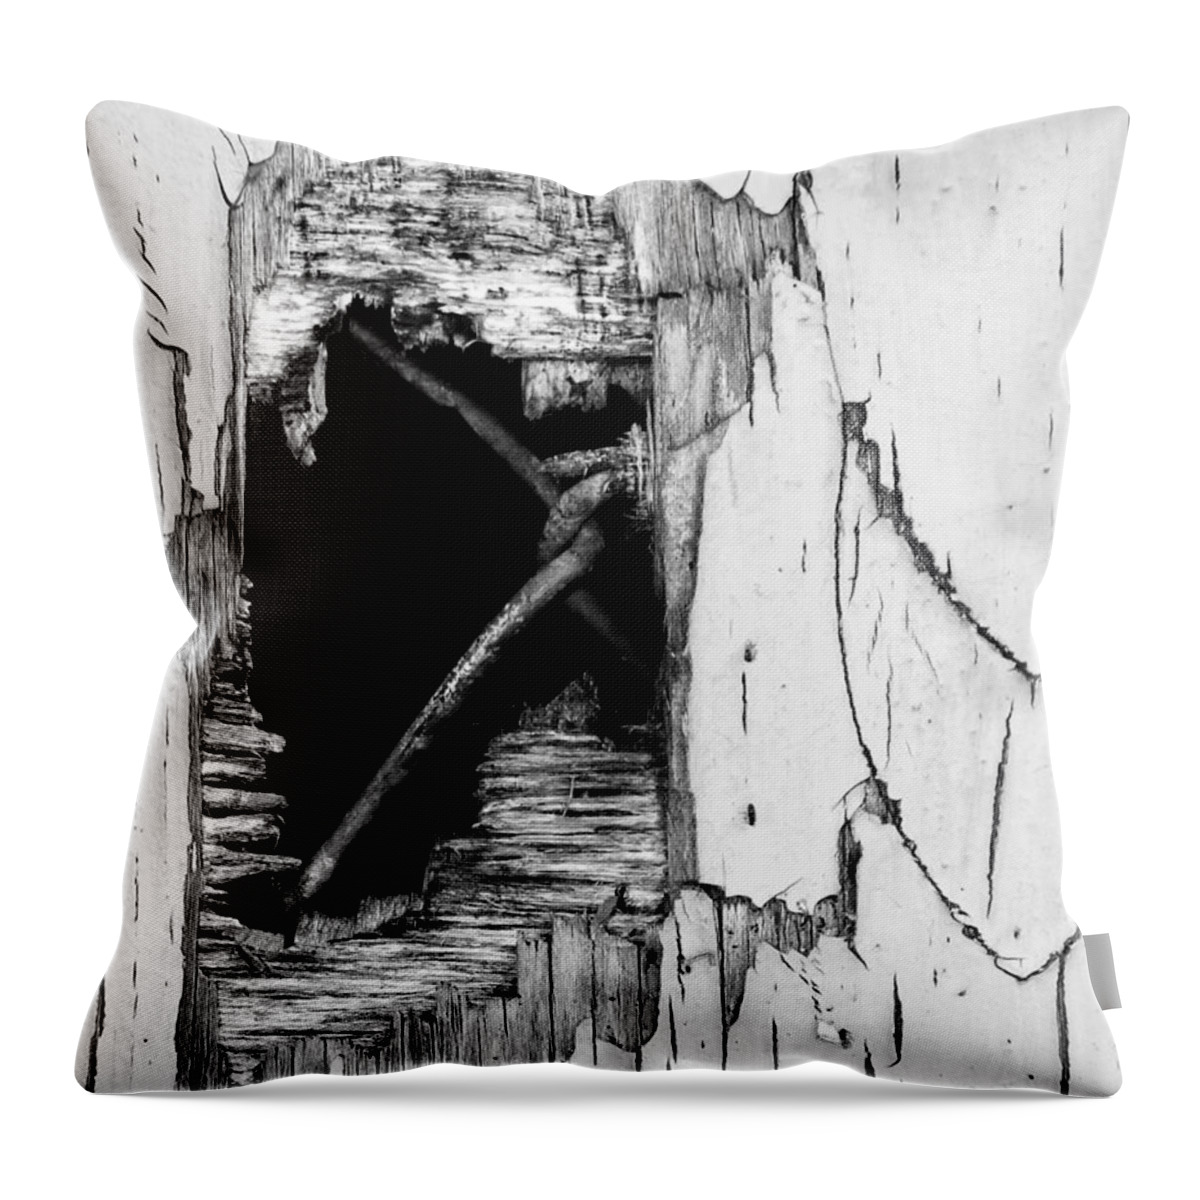 Abstract Throw Pillow featuring the photograph Bursting Through by Michael Ramsey